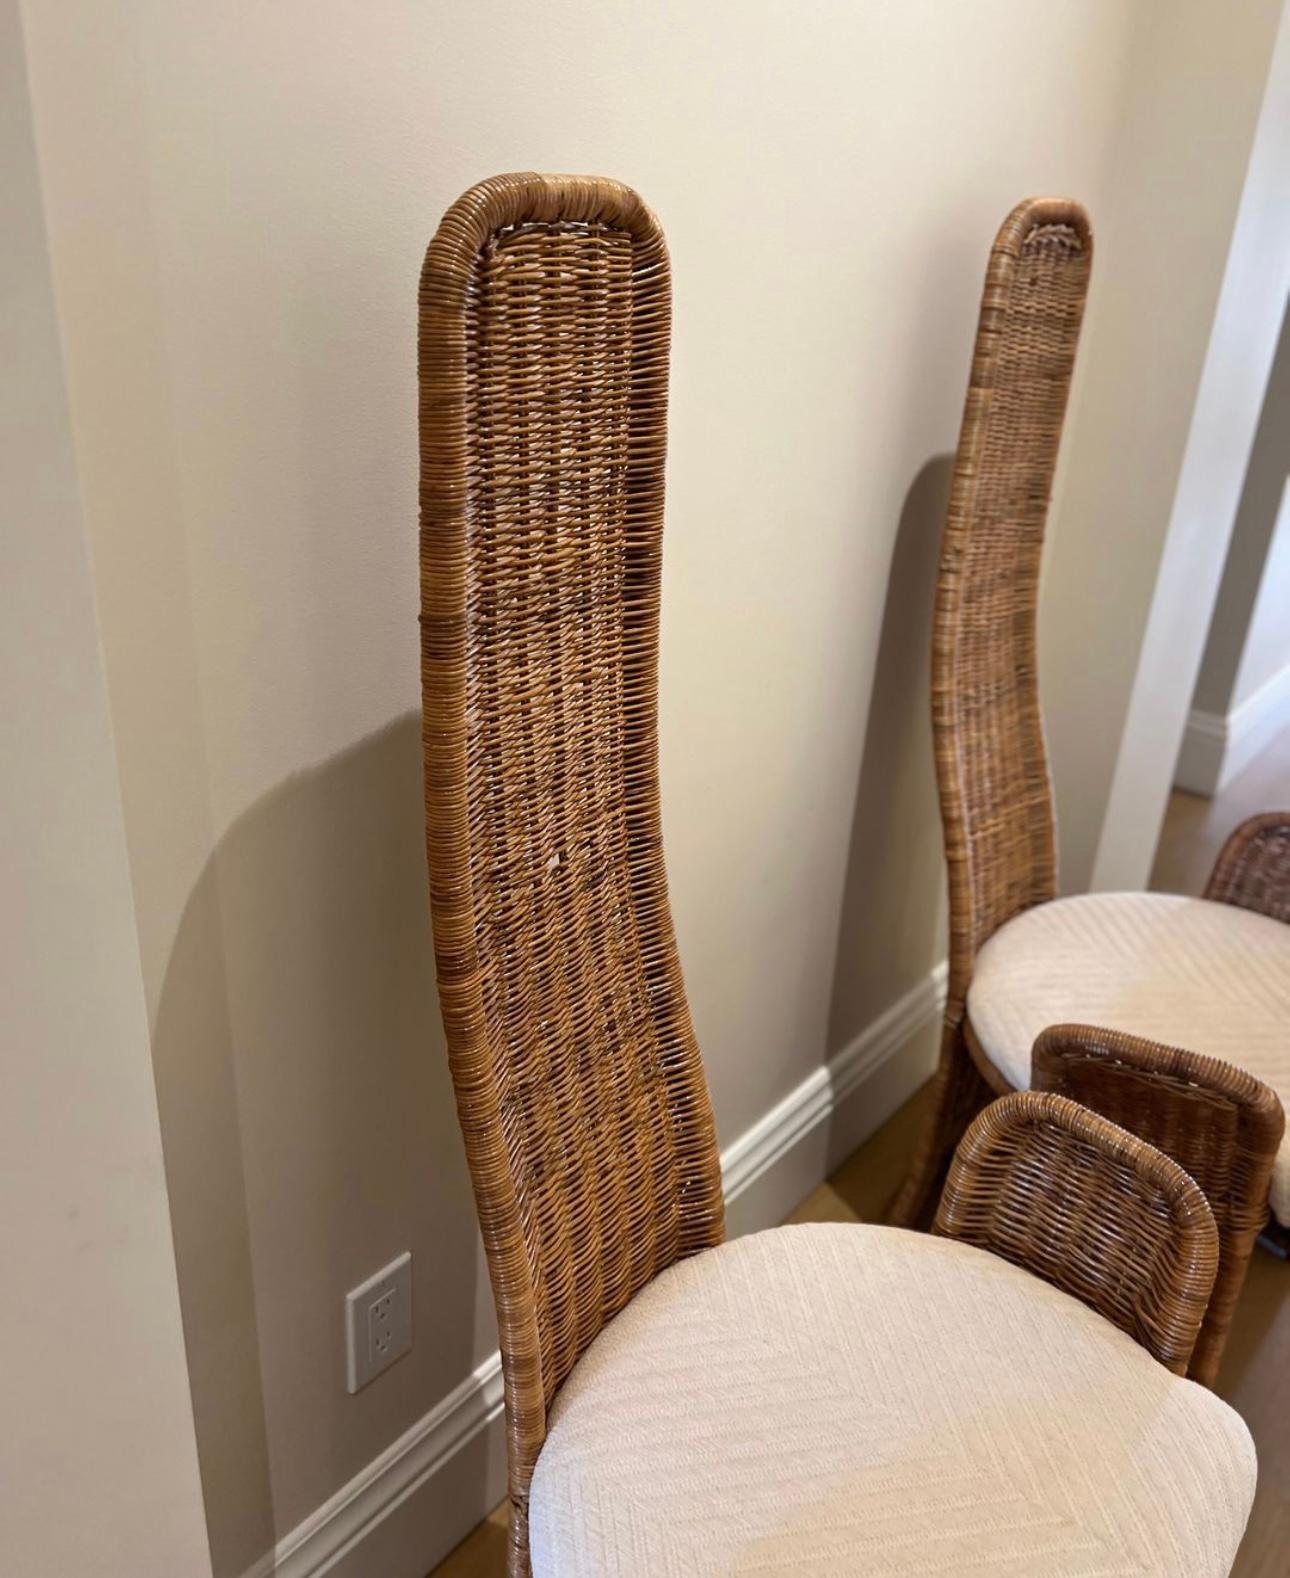 American Classical Pair of high back wicker accent chairs designed by Danny Ho Fong for Tropic-Cal For Sale